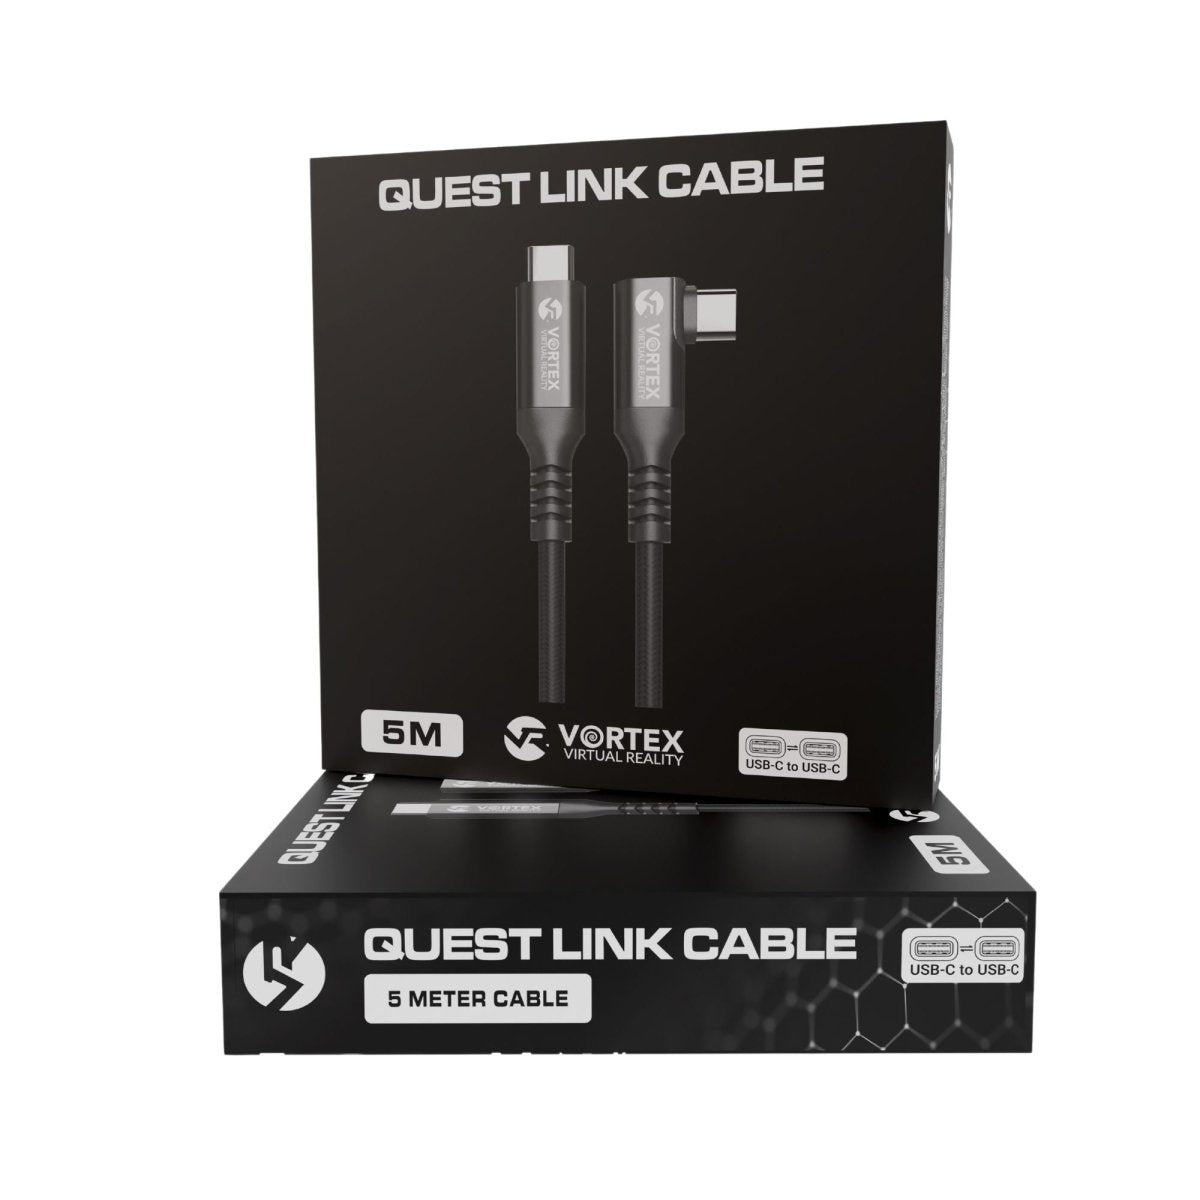 New 5m cable from VortexVR to Oculus Link, USB-C